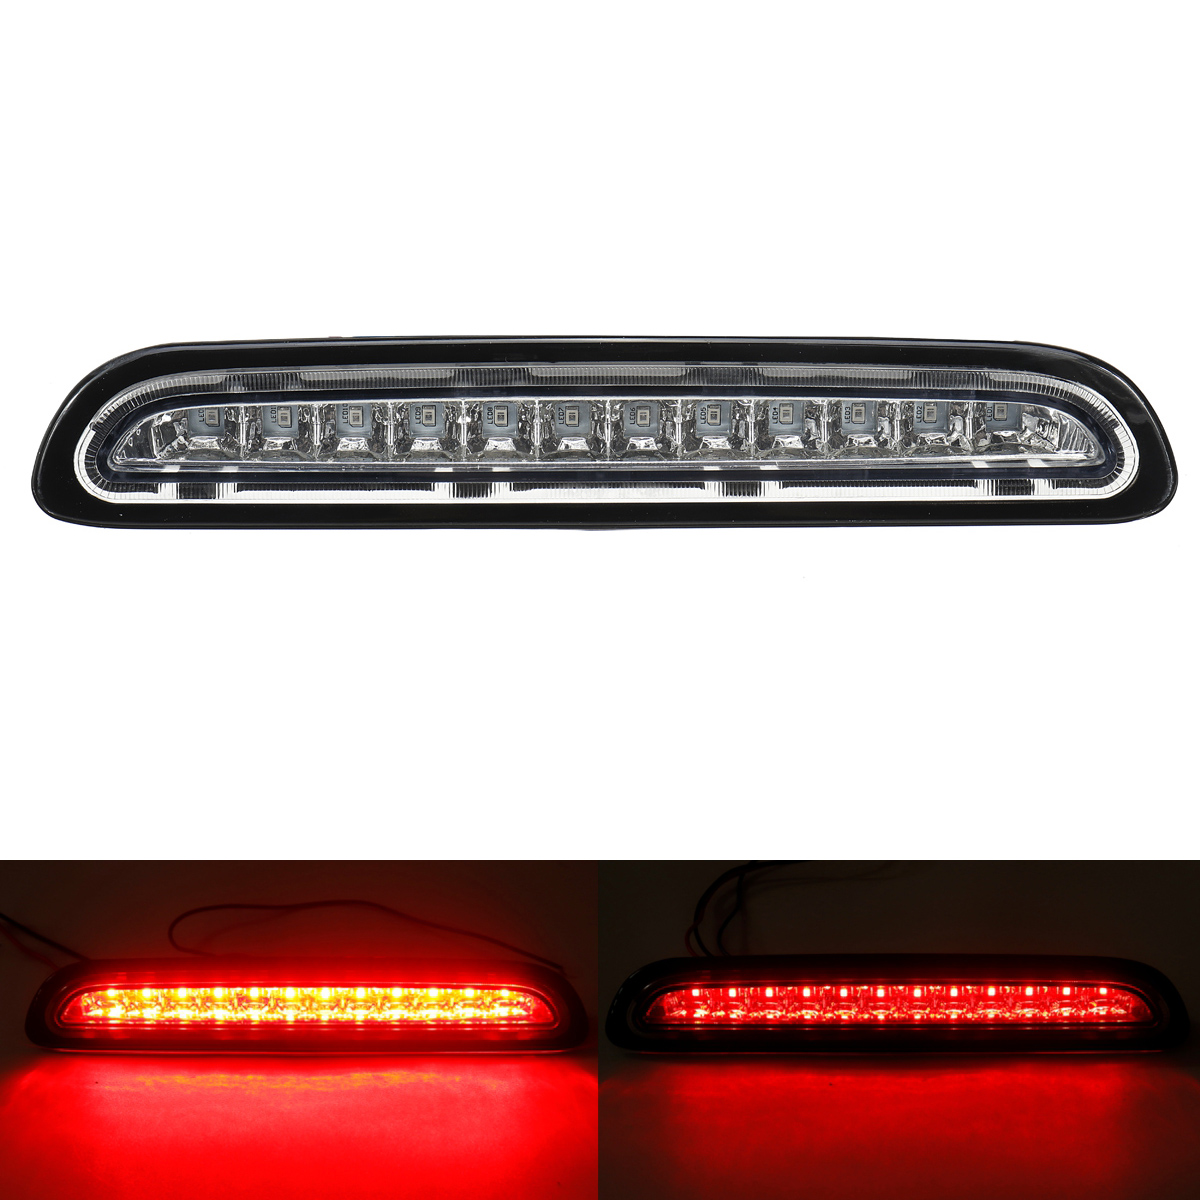 LED Rear Tail Brake Light High Mount Stop Lamp for Toyota Hiace Commuter 2005-2013